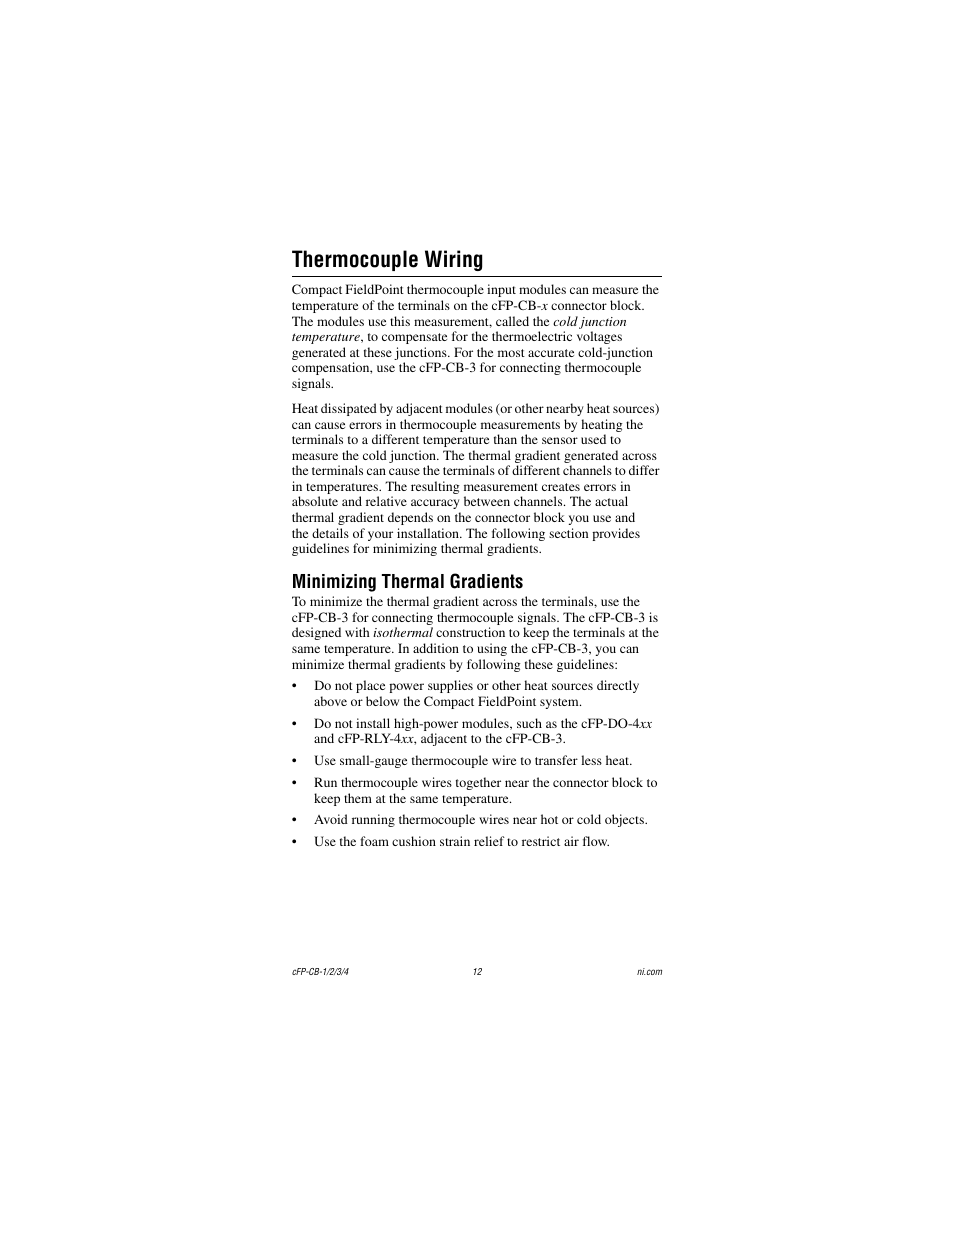 Thermocouple wiring, Minimizing thermal gradients | National Instruments CFP-CB-3 User Manual | Page 12 / 20